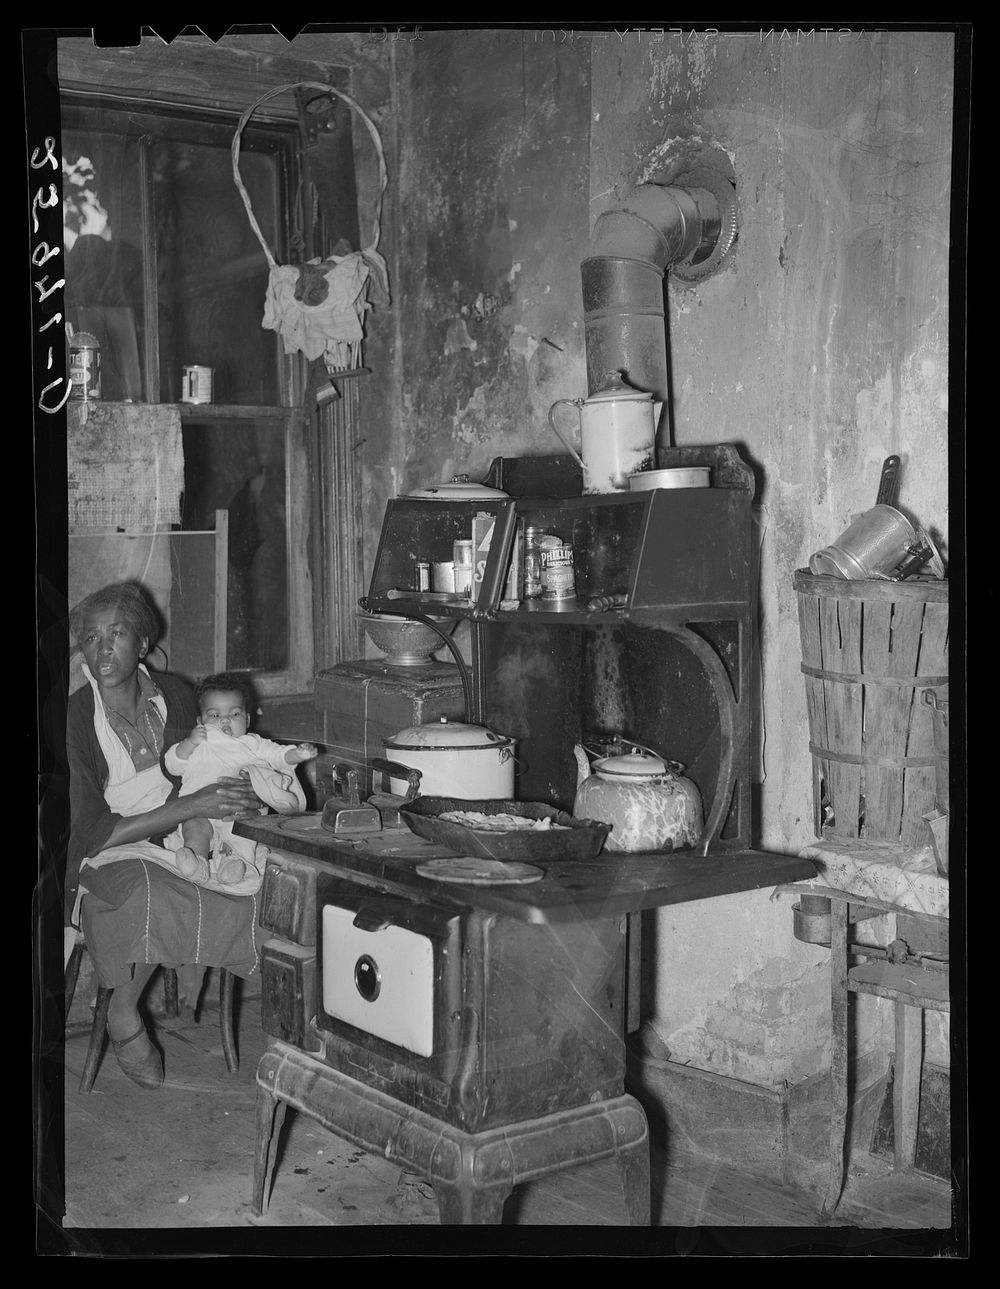 Slum kitchen. Washington, D.C.. Sourced from the Library of Congress.